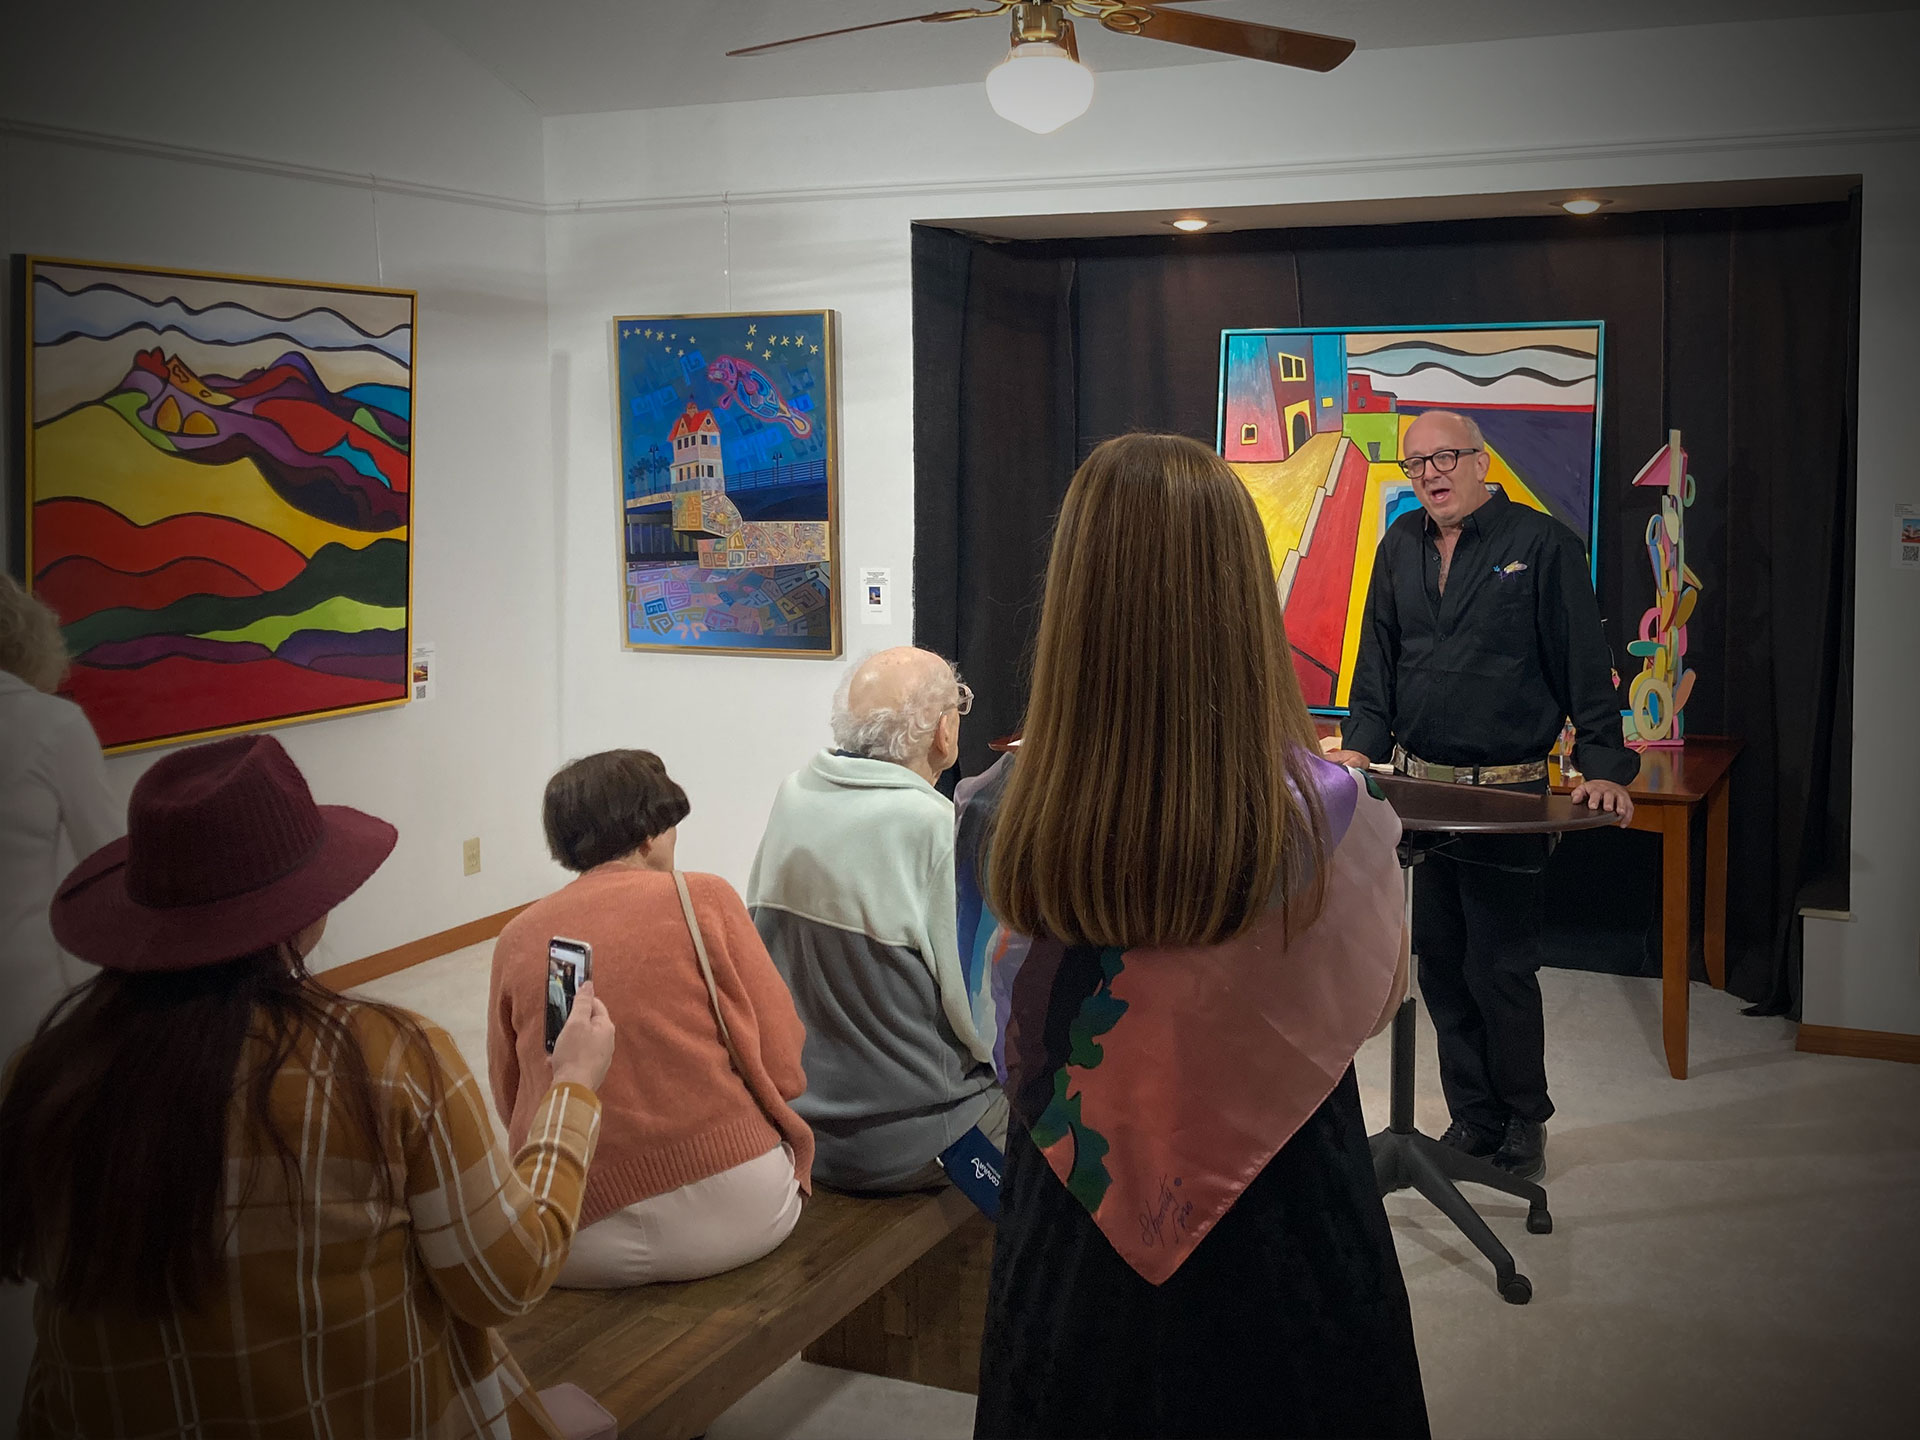 Stephen Shooster speaks during his art opening in the gallery.